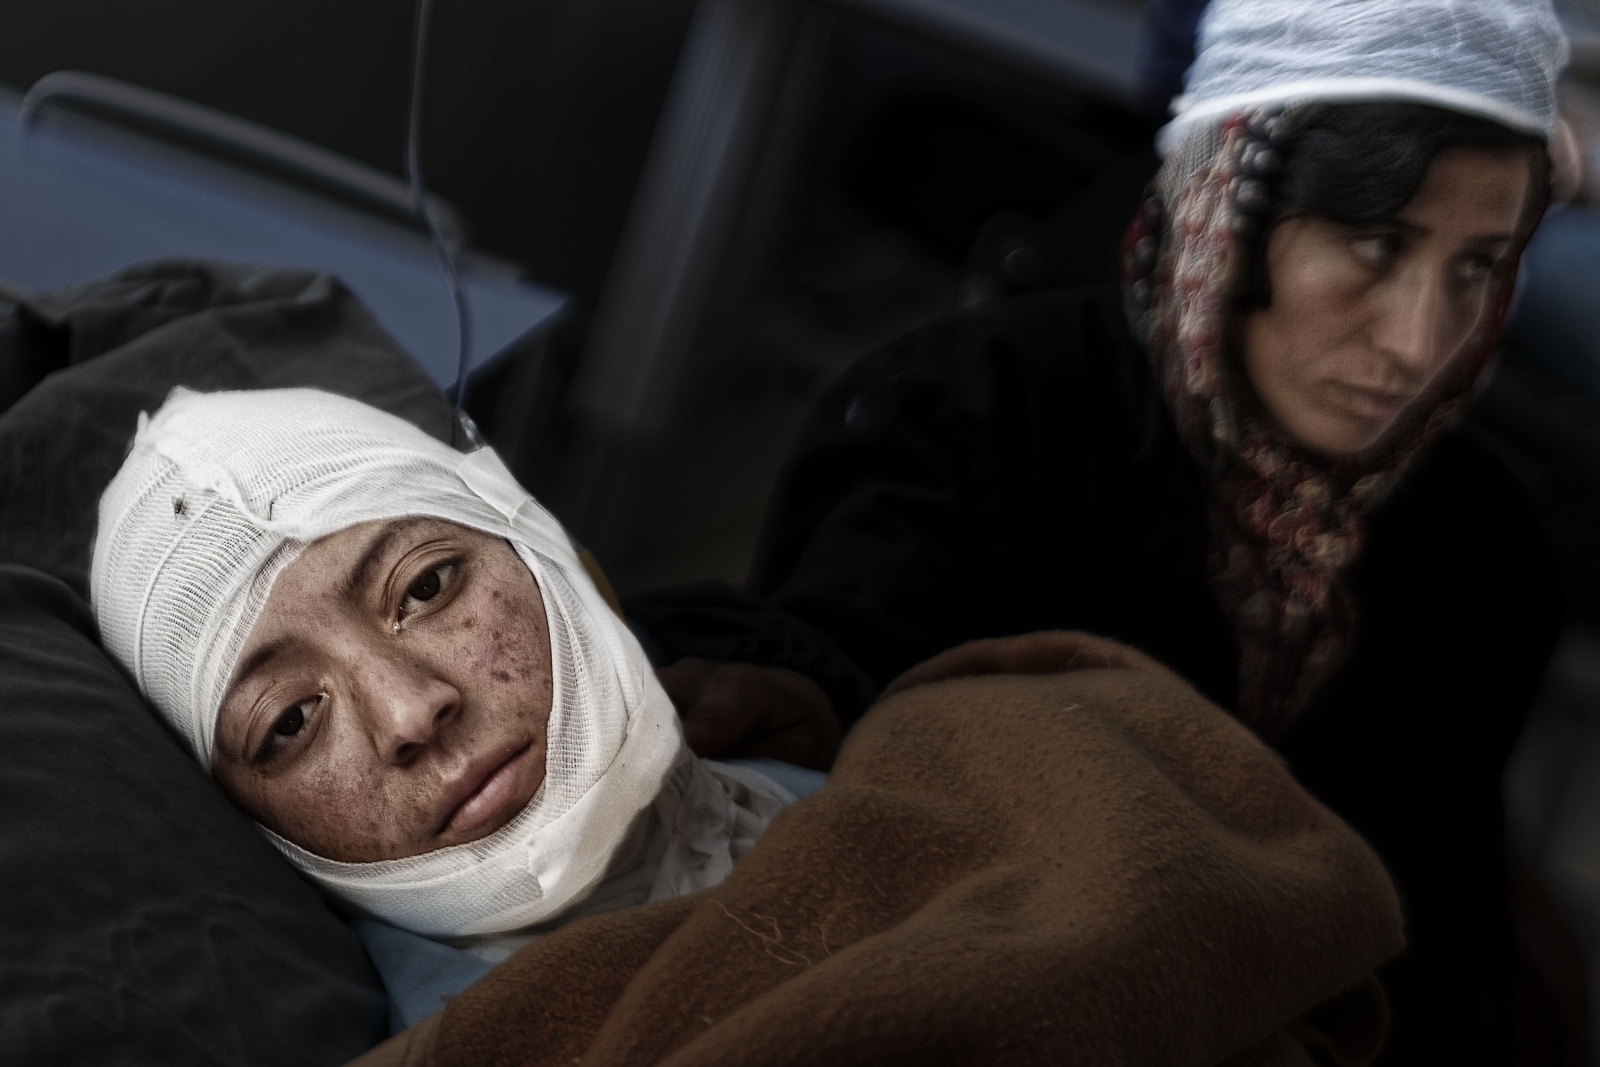 Afghanistan, ospedale Burning Centre di Herat dove vengono accolte le donne e i bambini ustionati. 
The woman tragedy of self-immolation in Afghanistan